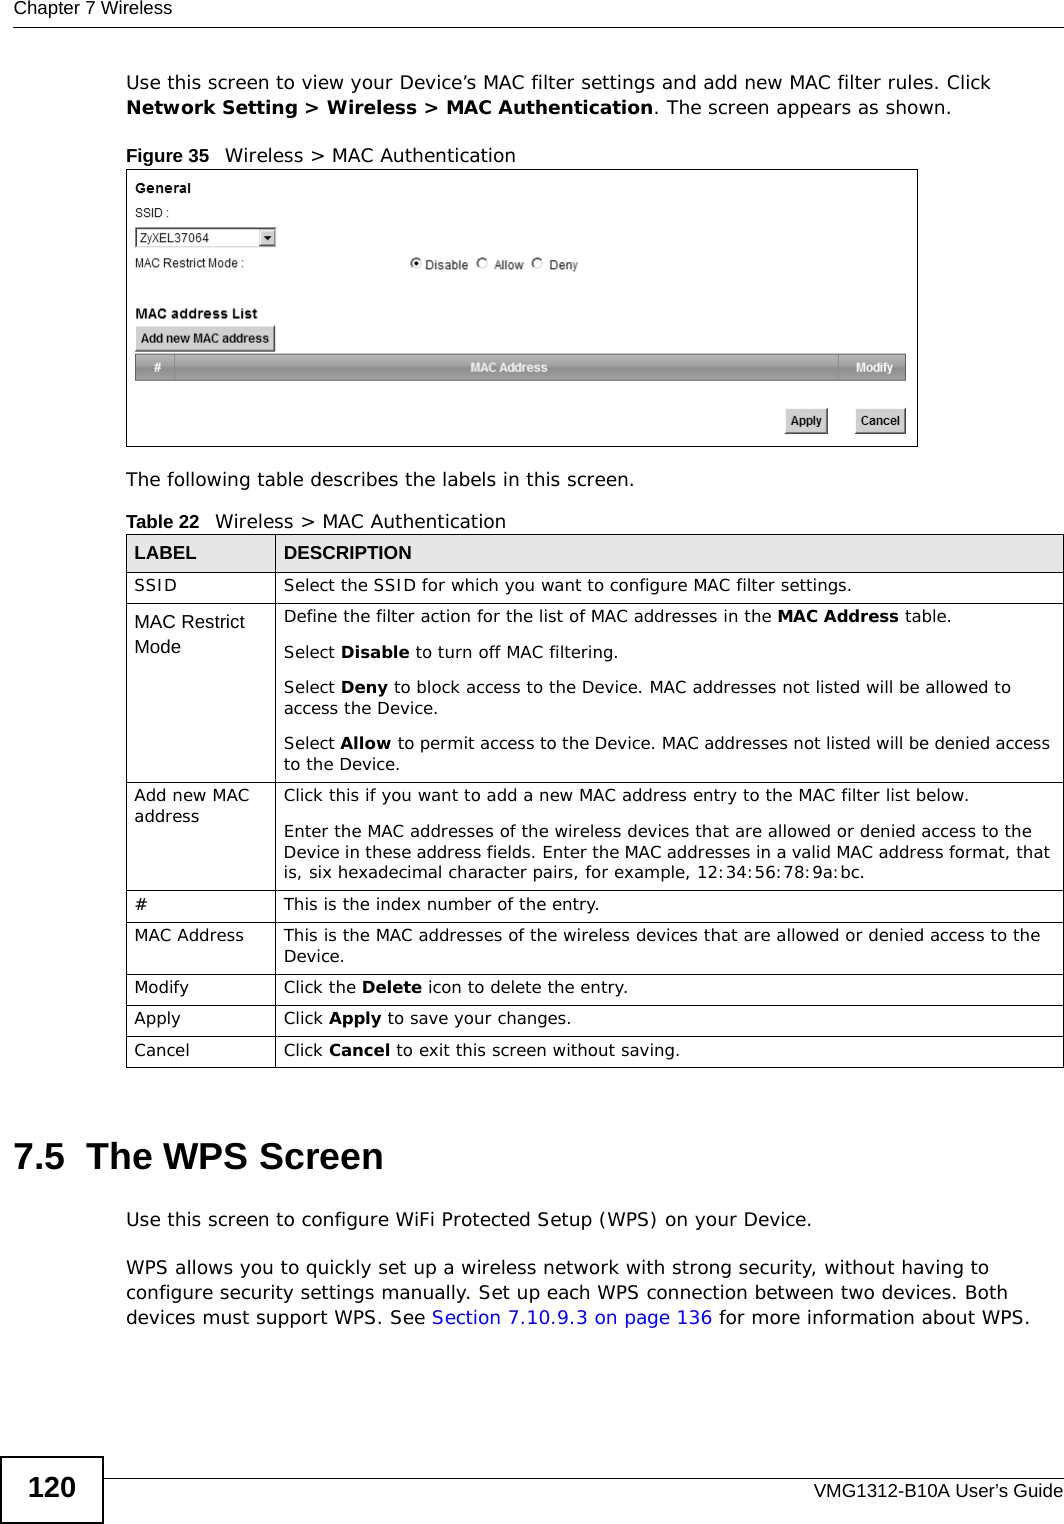 Chapter 7 WirelessVMG1312-B10A User’s Guide120Use this screen to view your Device’s MAC filter settings and add new MAC filter rules. Click Network Setting &gt; Wireless &gt; MAC Authentication. The screen appears as shown.Figure 35   Wireless &gt; MAC AuthenticationThe following table describes the labels in this screen.7.5  The WPS ScreenUse this screen to configure WiFi Protected Setup (WPS) on your Device.WPS allows you to quickly set up a wireless network with strong security, without having to configure security settings manually. Set up each WPS connection between two devices. Both devices must support WPS. See Section 7.10.9.3 on page 136 for more information about WPS.Table 22   Wireless &gt; MAC AuthenticationLABEL DESCRIPTIONSSID Select the SSID for which you want to configure MAC filter settings.MAC Restrict Mode Define the filter action for the list of MAC addresses in the MAC Address table. Select Disable to turn off MAC filtering.Select Deny to block access to the Device. MAC addresses not listed will be allowed to access the Device. Select Allow to permit access to the Device. MAC addresses not listed will be denied access to the Device. Add new MAC address Click this if you want to add a new MAC address entry to the MAC filter list below.Enter the MAC addresses of the wireless devices that are allowed or denied access to the Device in these address fields. Enter the MAC addresses in a valid MAC address format, that is, six hexadecimal character pairs, for example, 12:34:56:78:9a:bc.#This is the index number of the entry.MAC Address This is the MAC addresses of the wireless devices that are allowed or denied access to the Device.Modify Click the Delete icon to delete the entry.Apply Click Apply to save your changes.Cancel Click Cancel to exit this screen without saving.